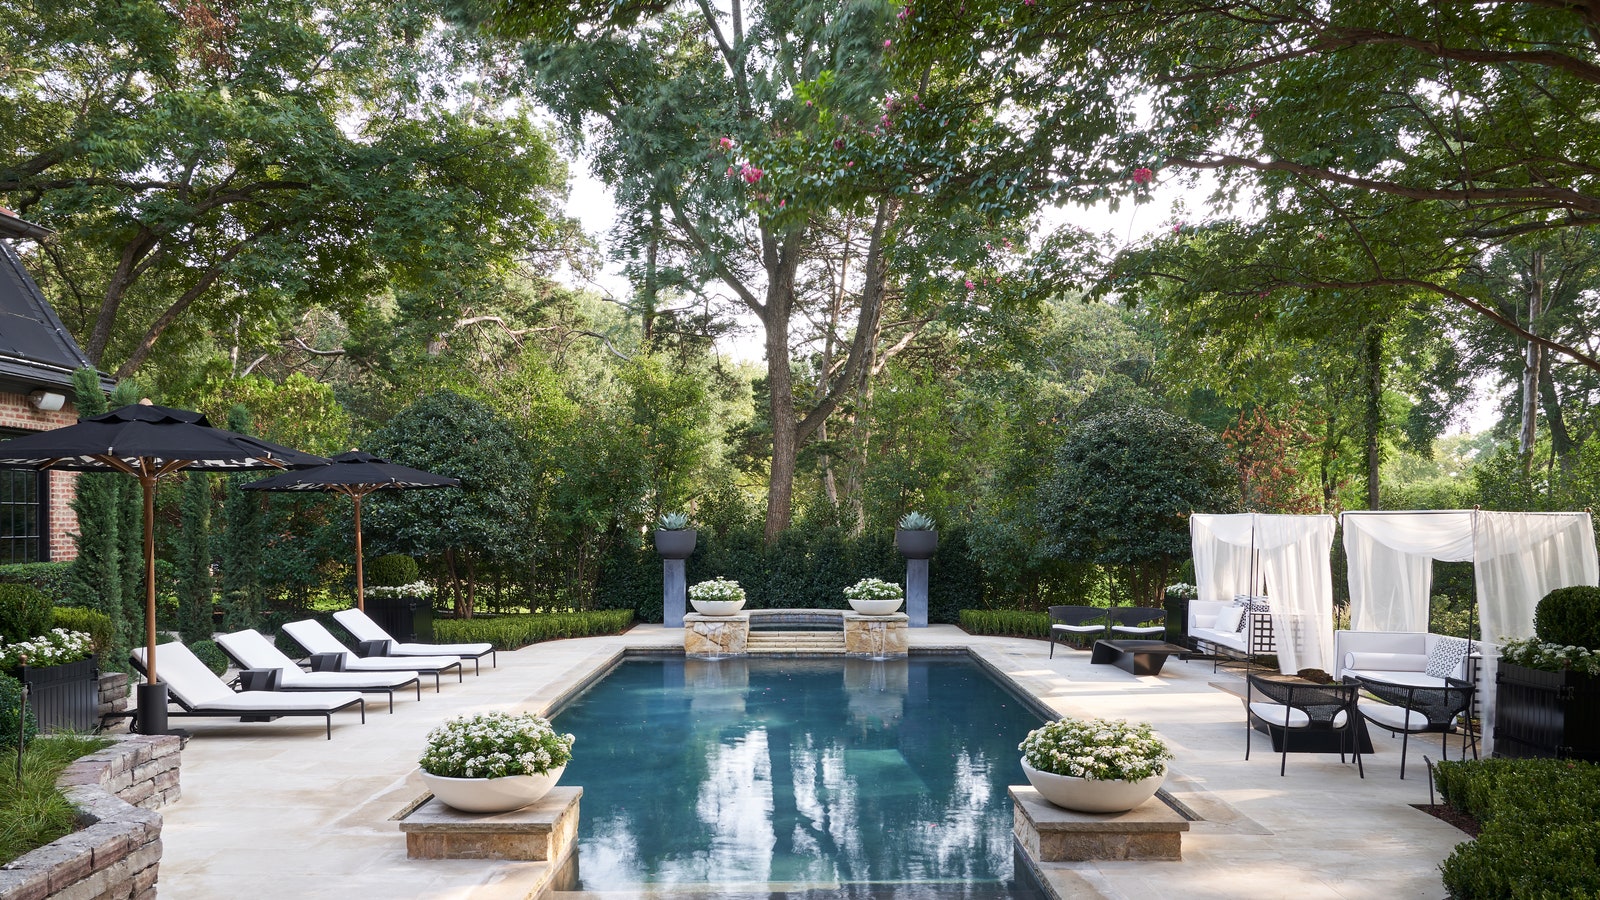 There are many benefits to hiring a landscape designer like Melissa Gerstle who created this pool area for the 2020 Kips...